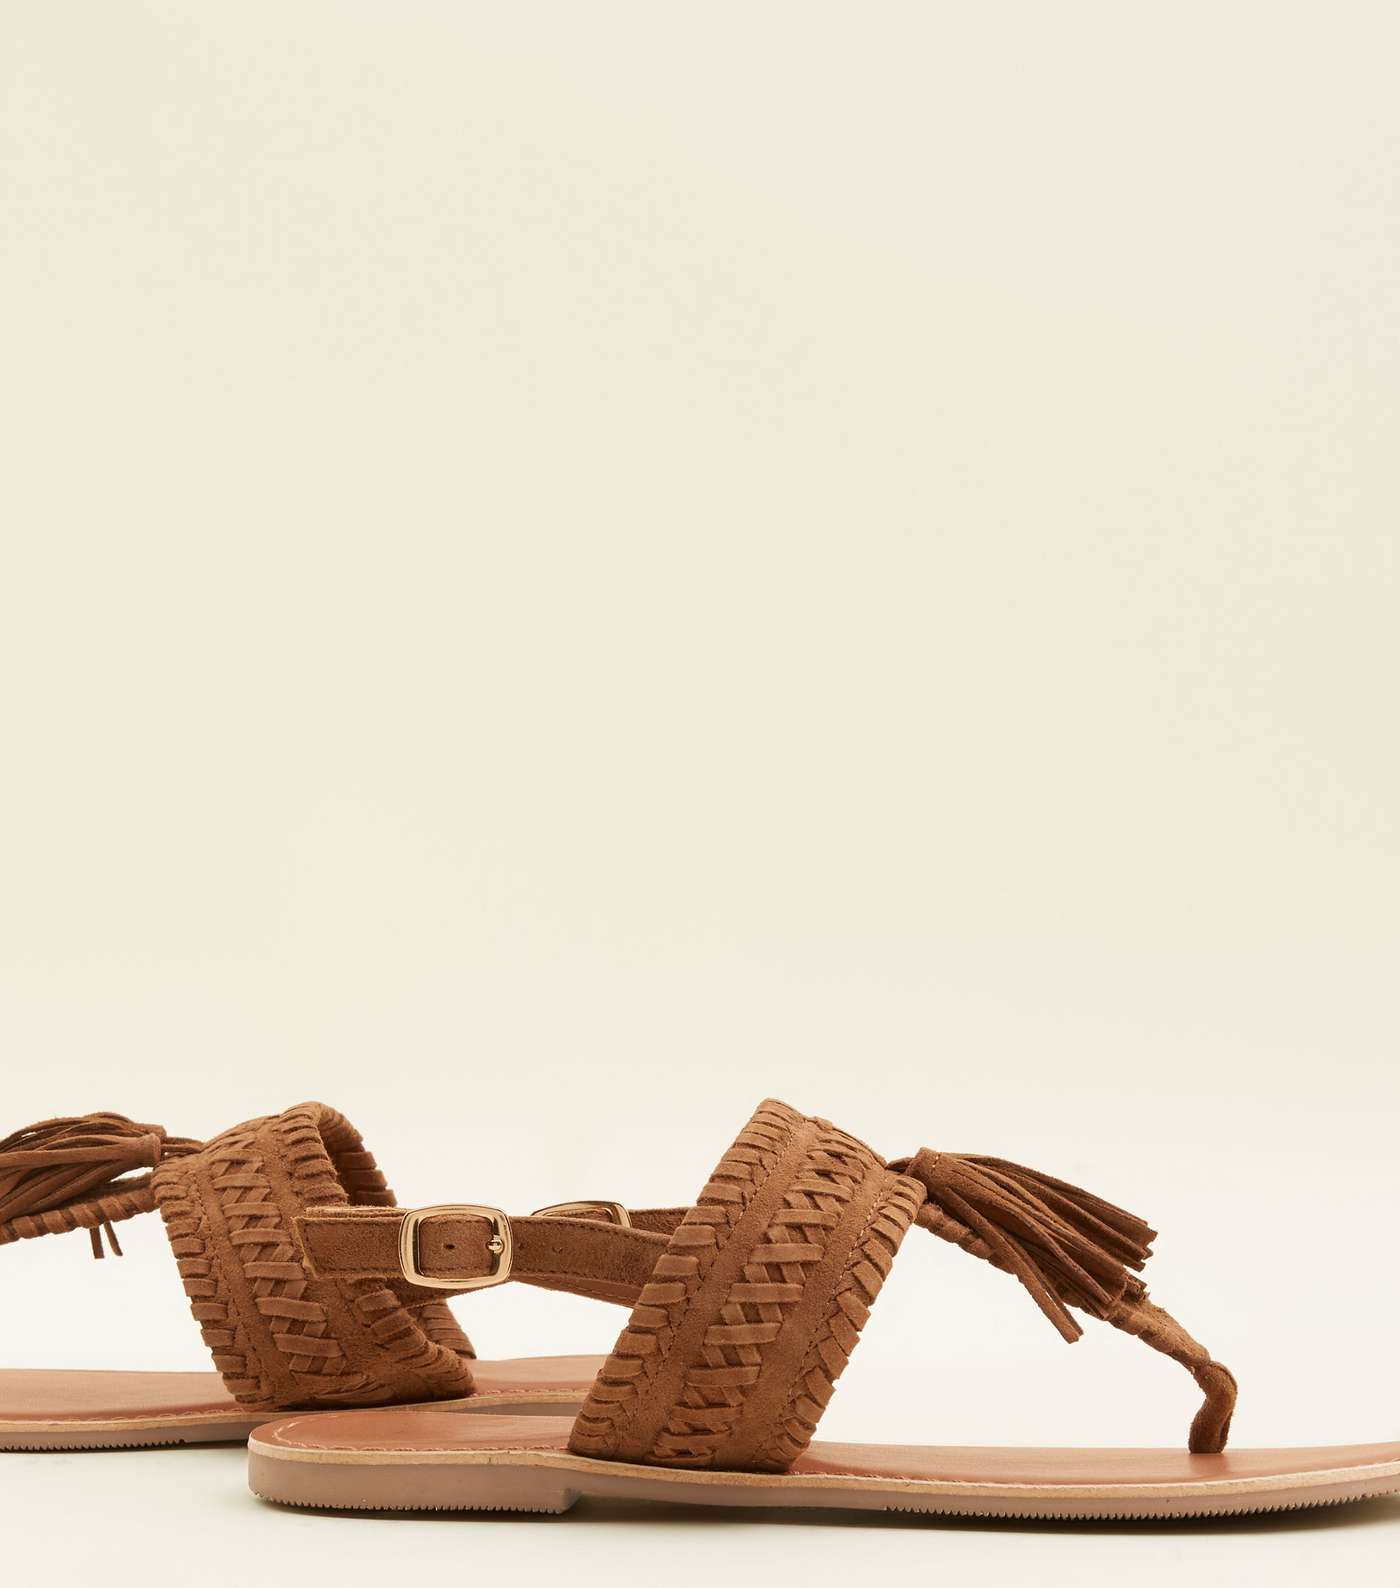 Wide Fit Tan Suede Tassel Woven Strap Sandals Image 4